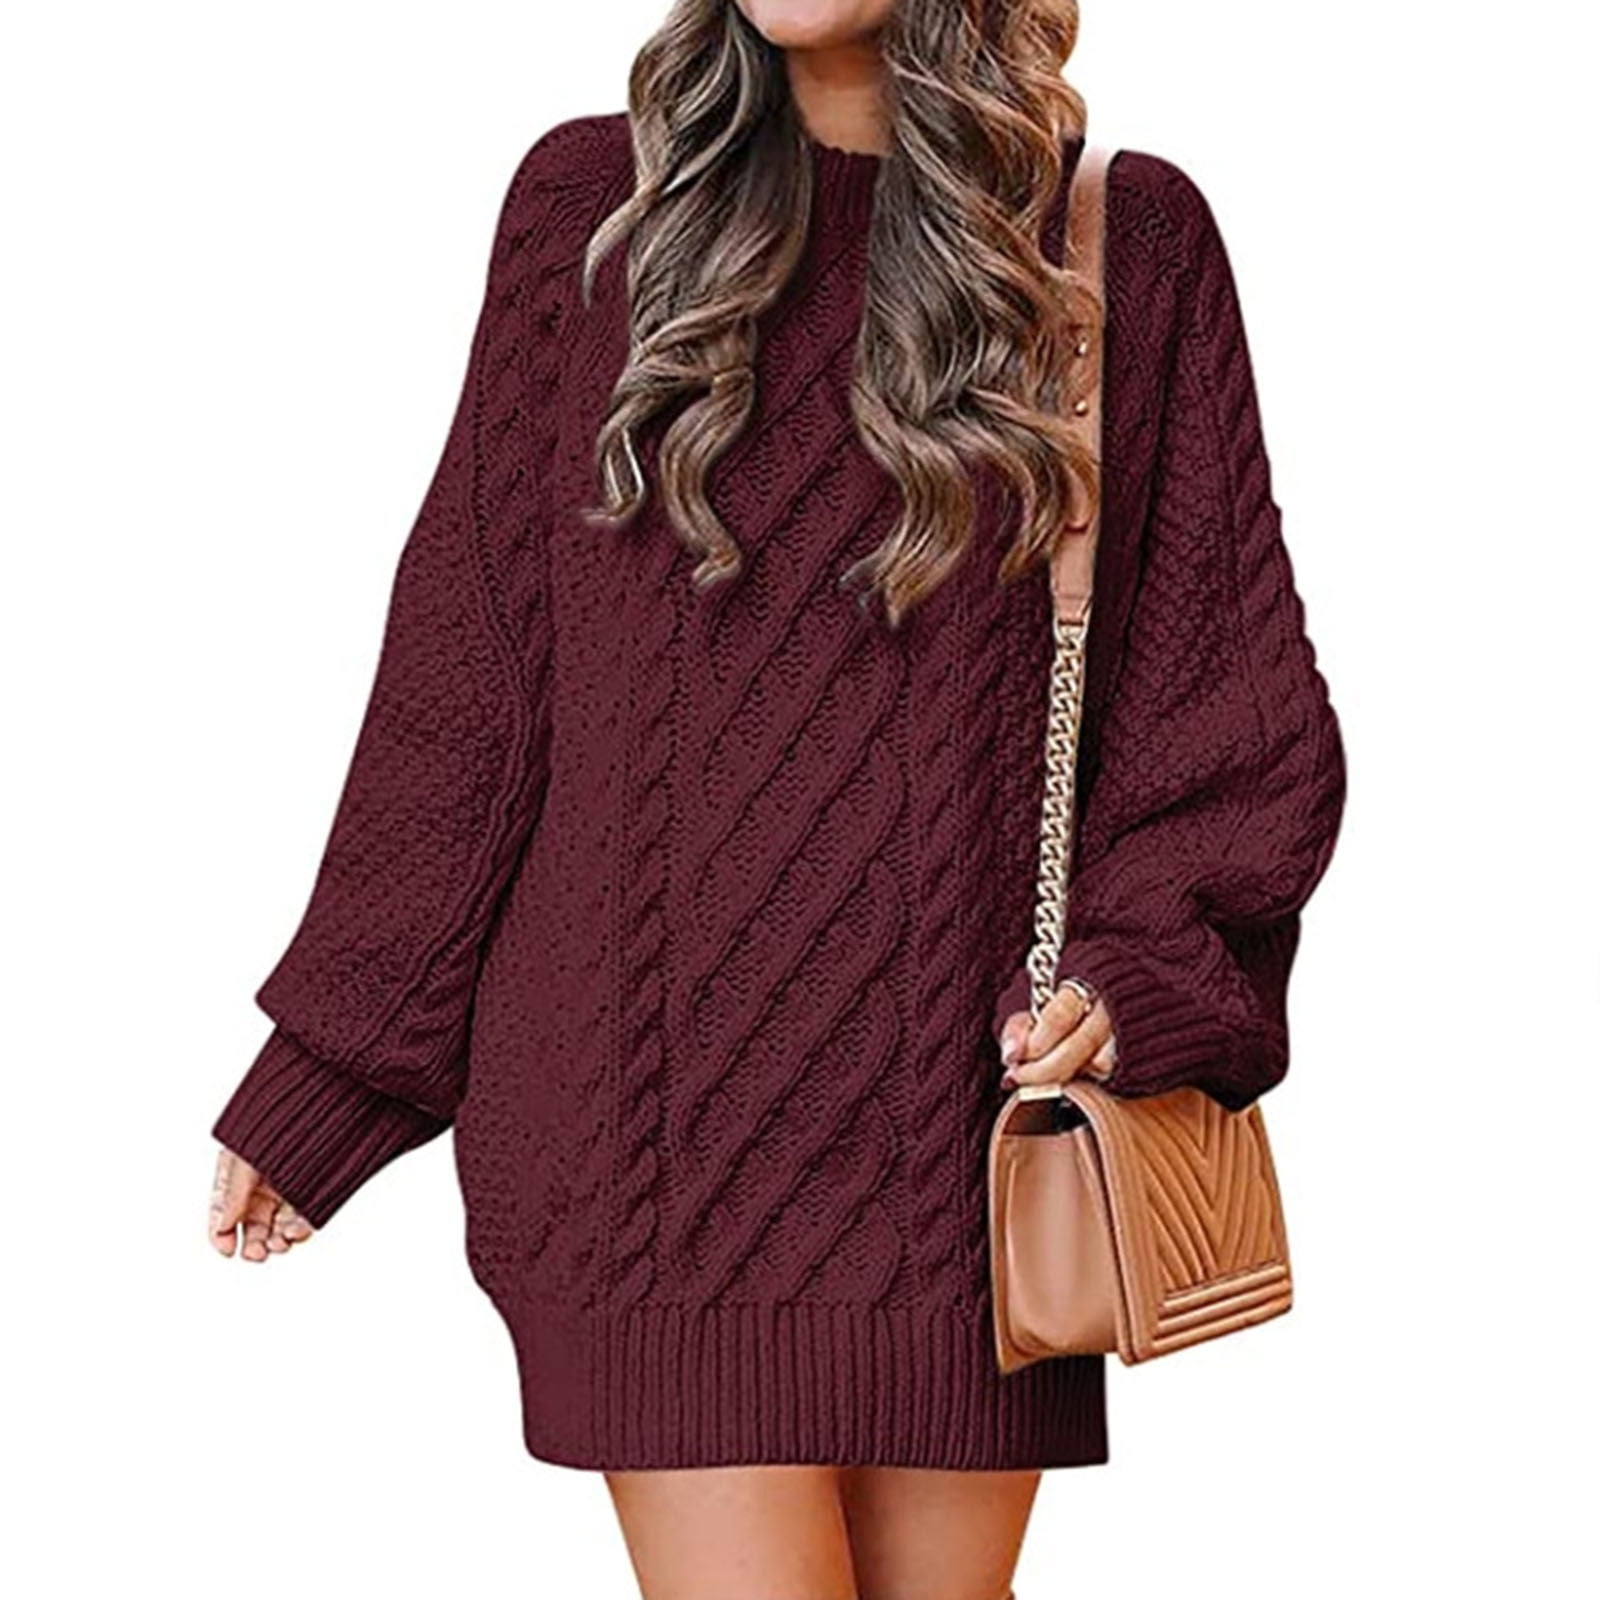 Sweater Dress for Women Knitted Sweater Dress Round Neck Long Sleeve ...